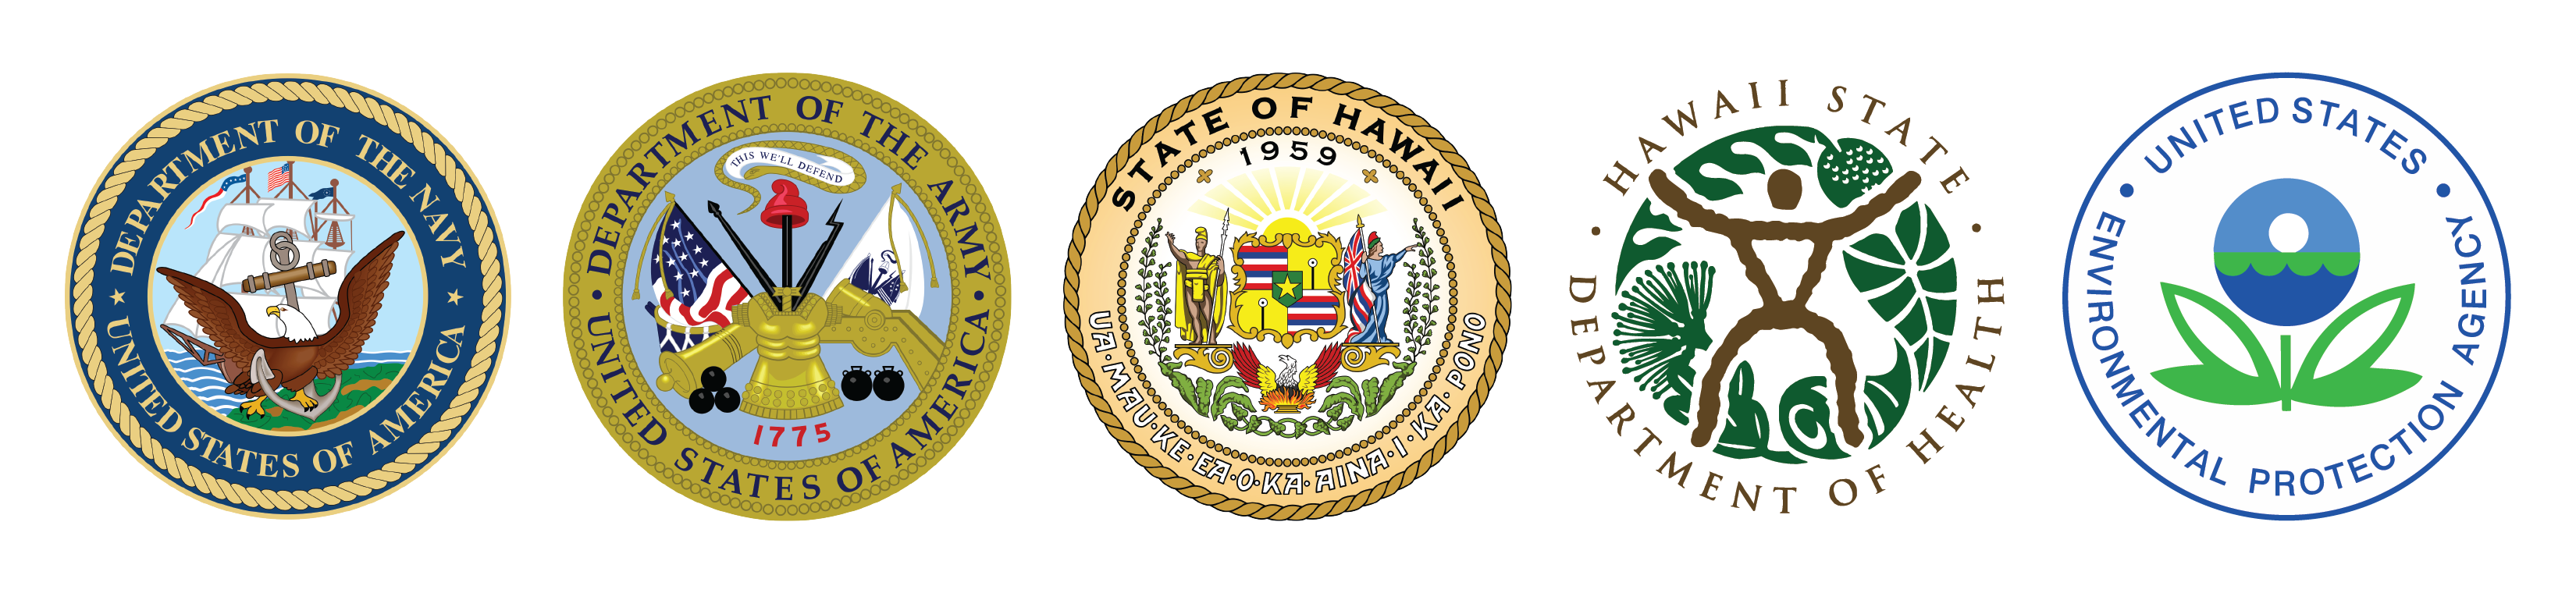 Department of the Navy, Department of the Army, State of Hawaii, Hawaii State Department of Health and United States Environmental Protection Agency logos